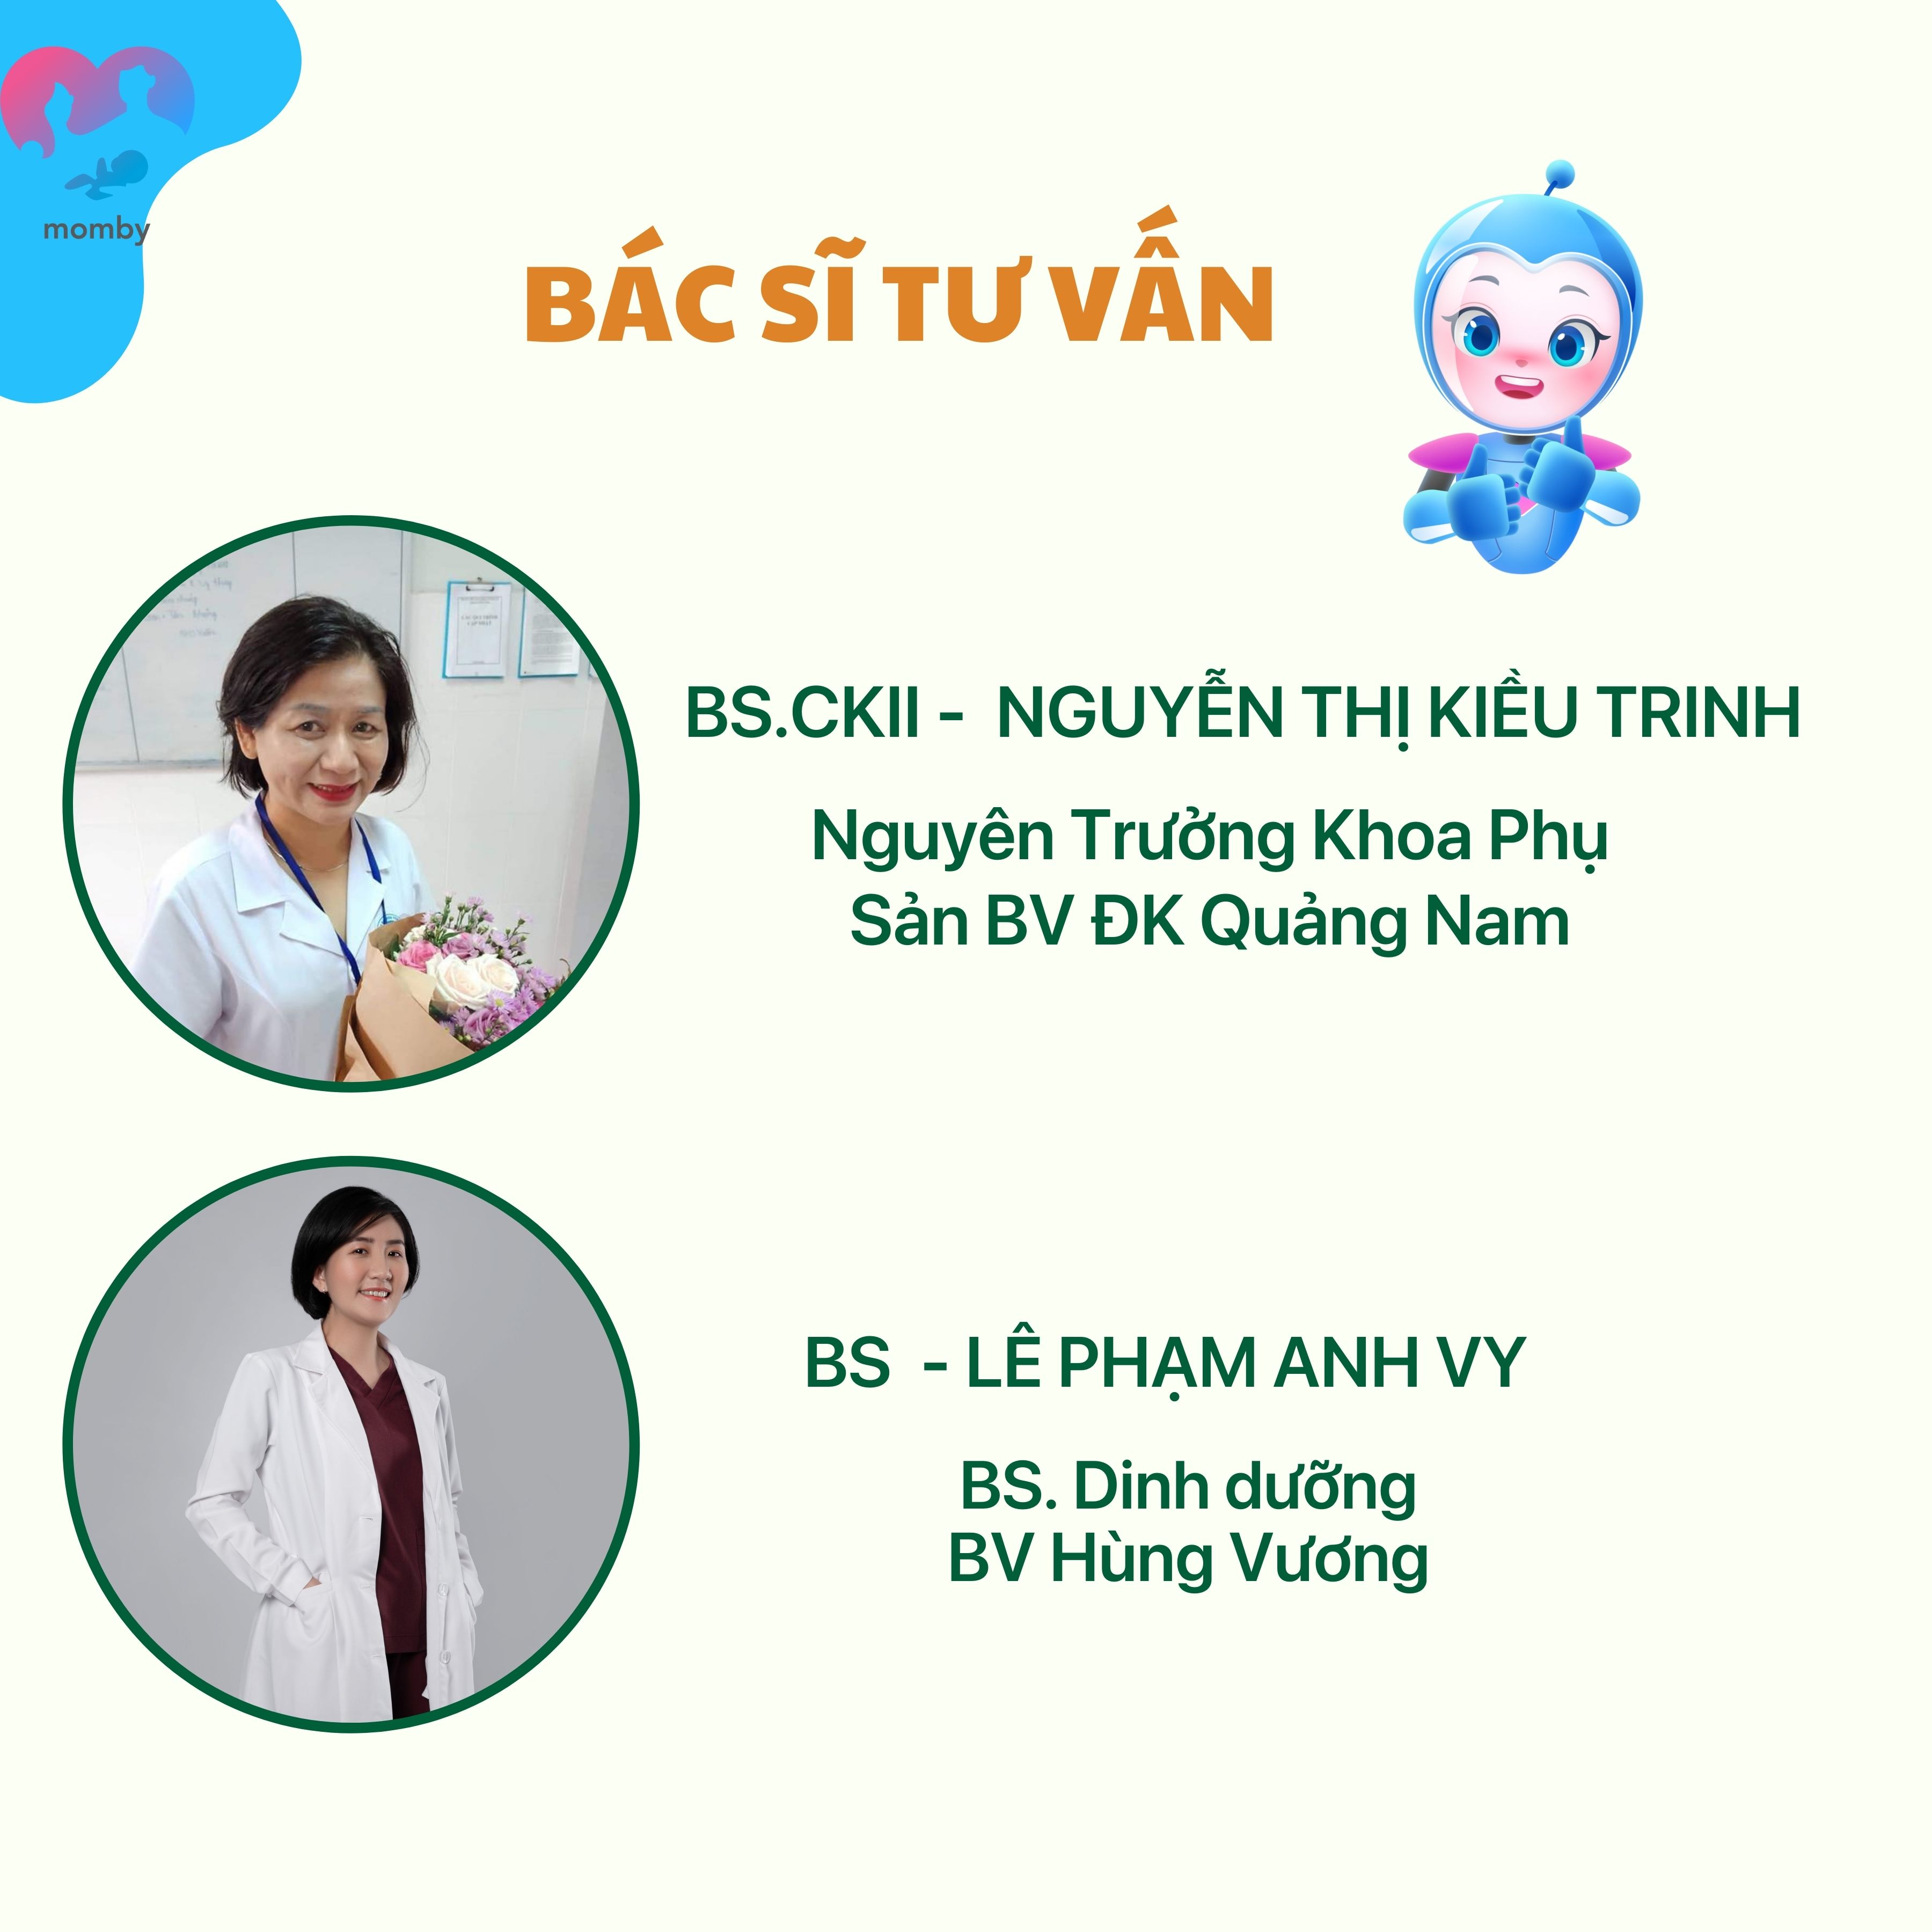 hinh-anh-gap-go-ceo-ngoc-nguyen-trong-bai-chia-se-voi-to-chuc-alive-thrive-ve-ung-dung-momby-6-1